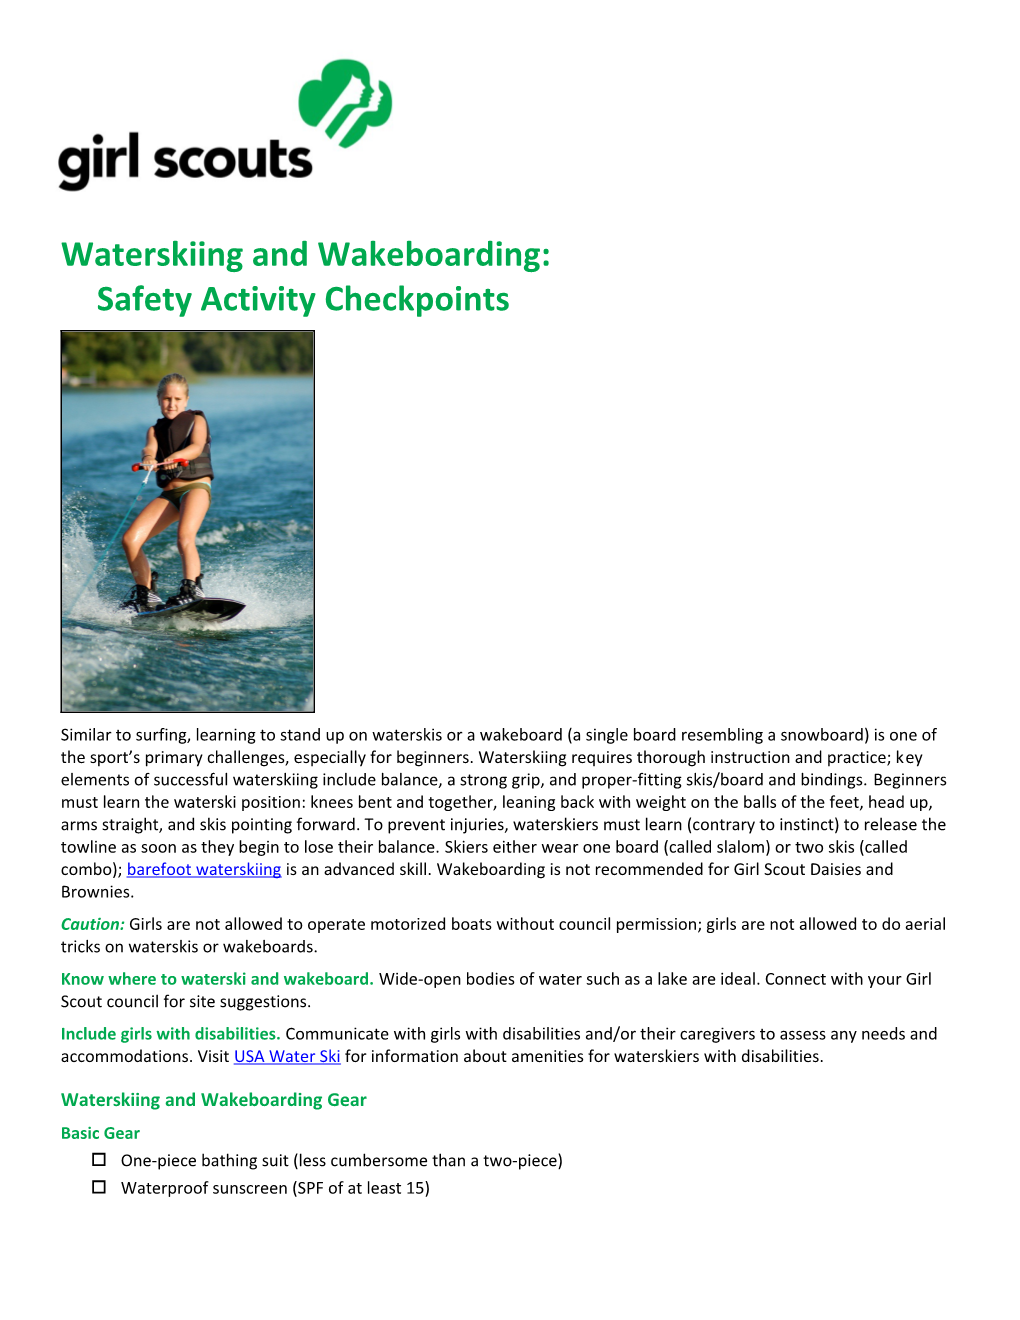 Waterskiing and Wakeboarding: Safety Activity Checkpoints